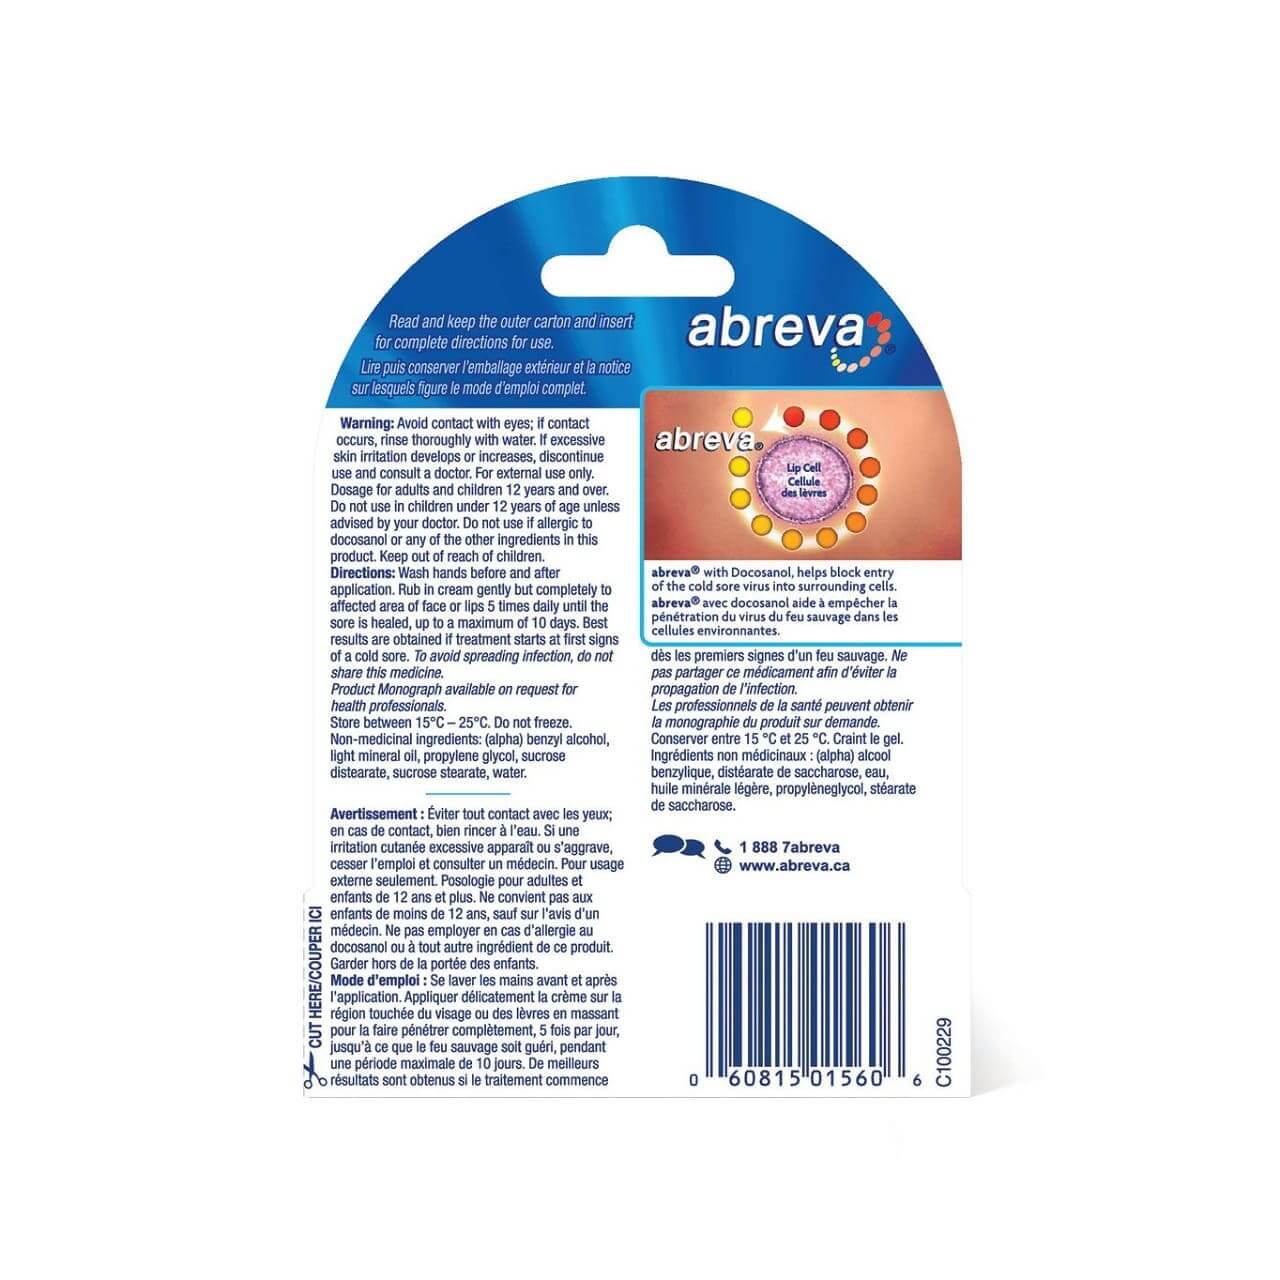 Warnings, directions, ingredients for Abreva Cold Sore Treatment Pump Cream (2g)